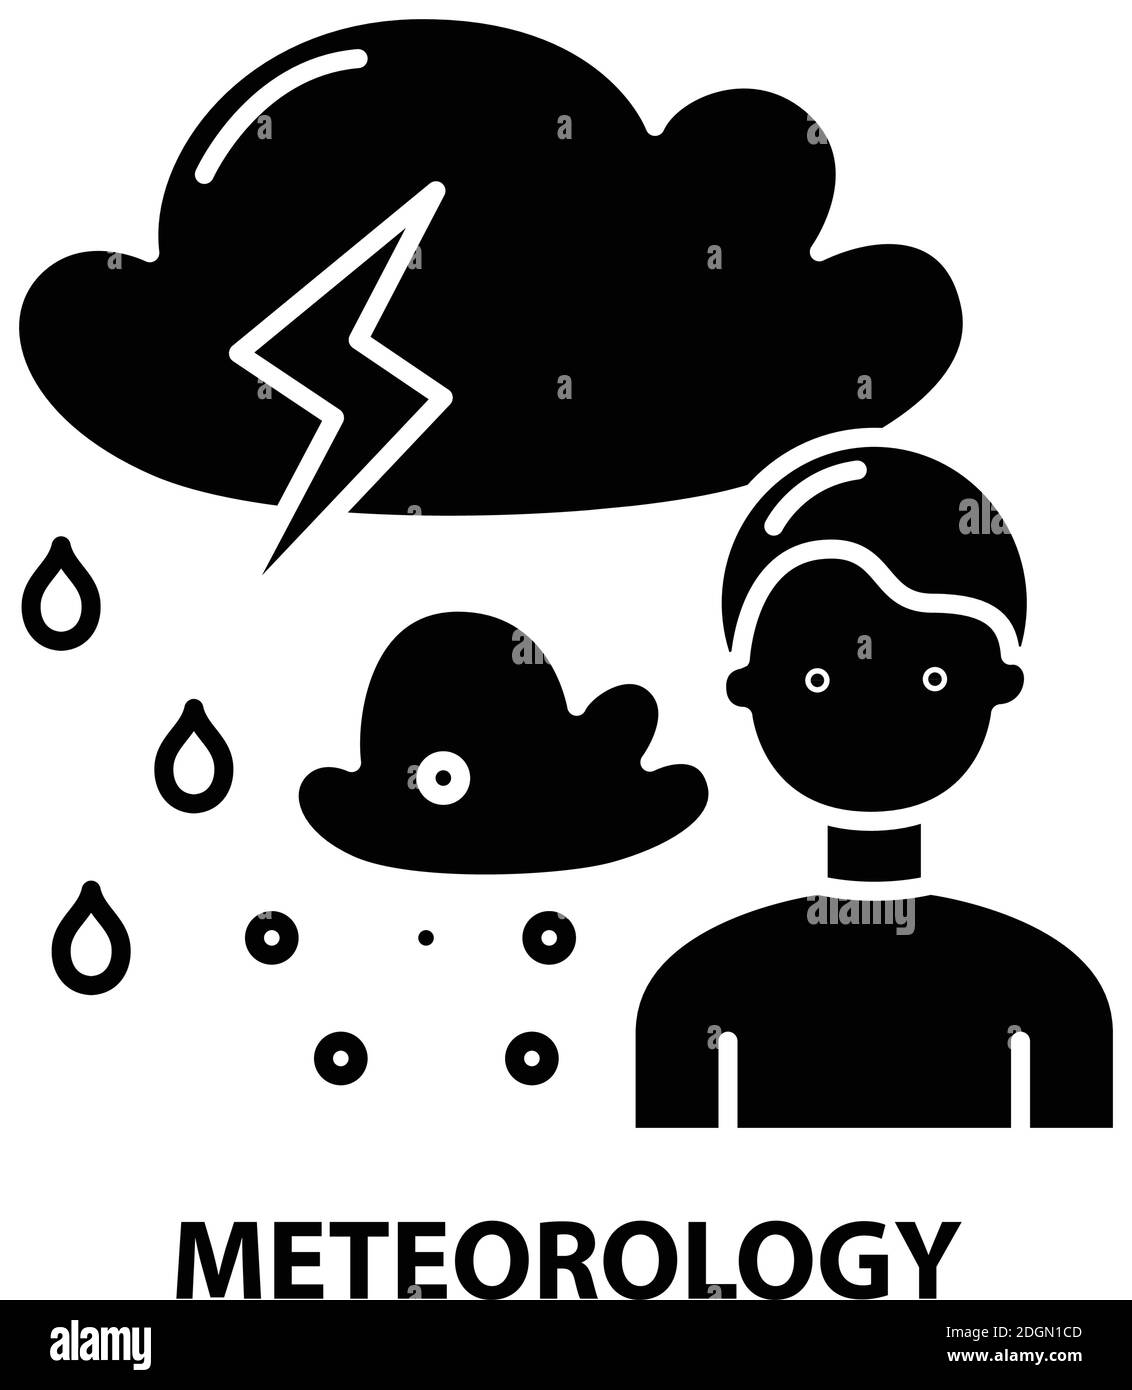 meteorology icon, black vector sign with editable strokes, concept illustration Stock Vector